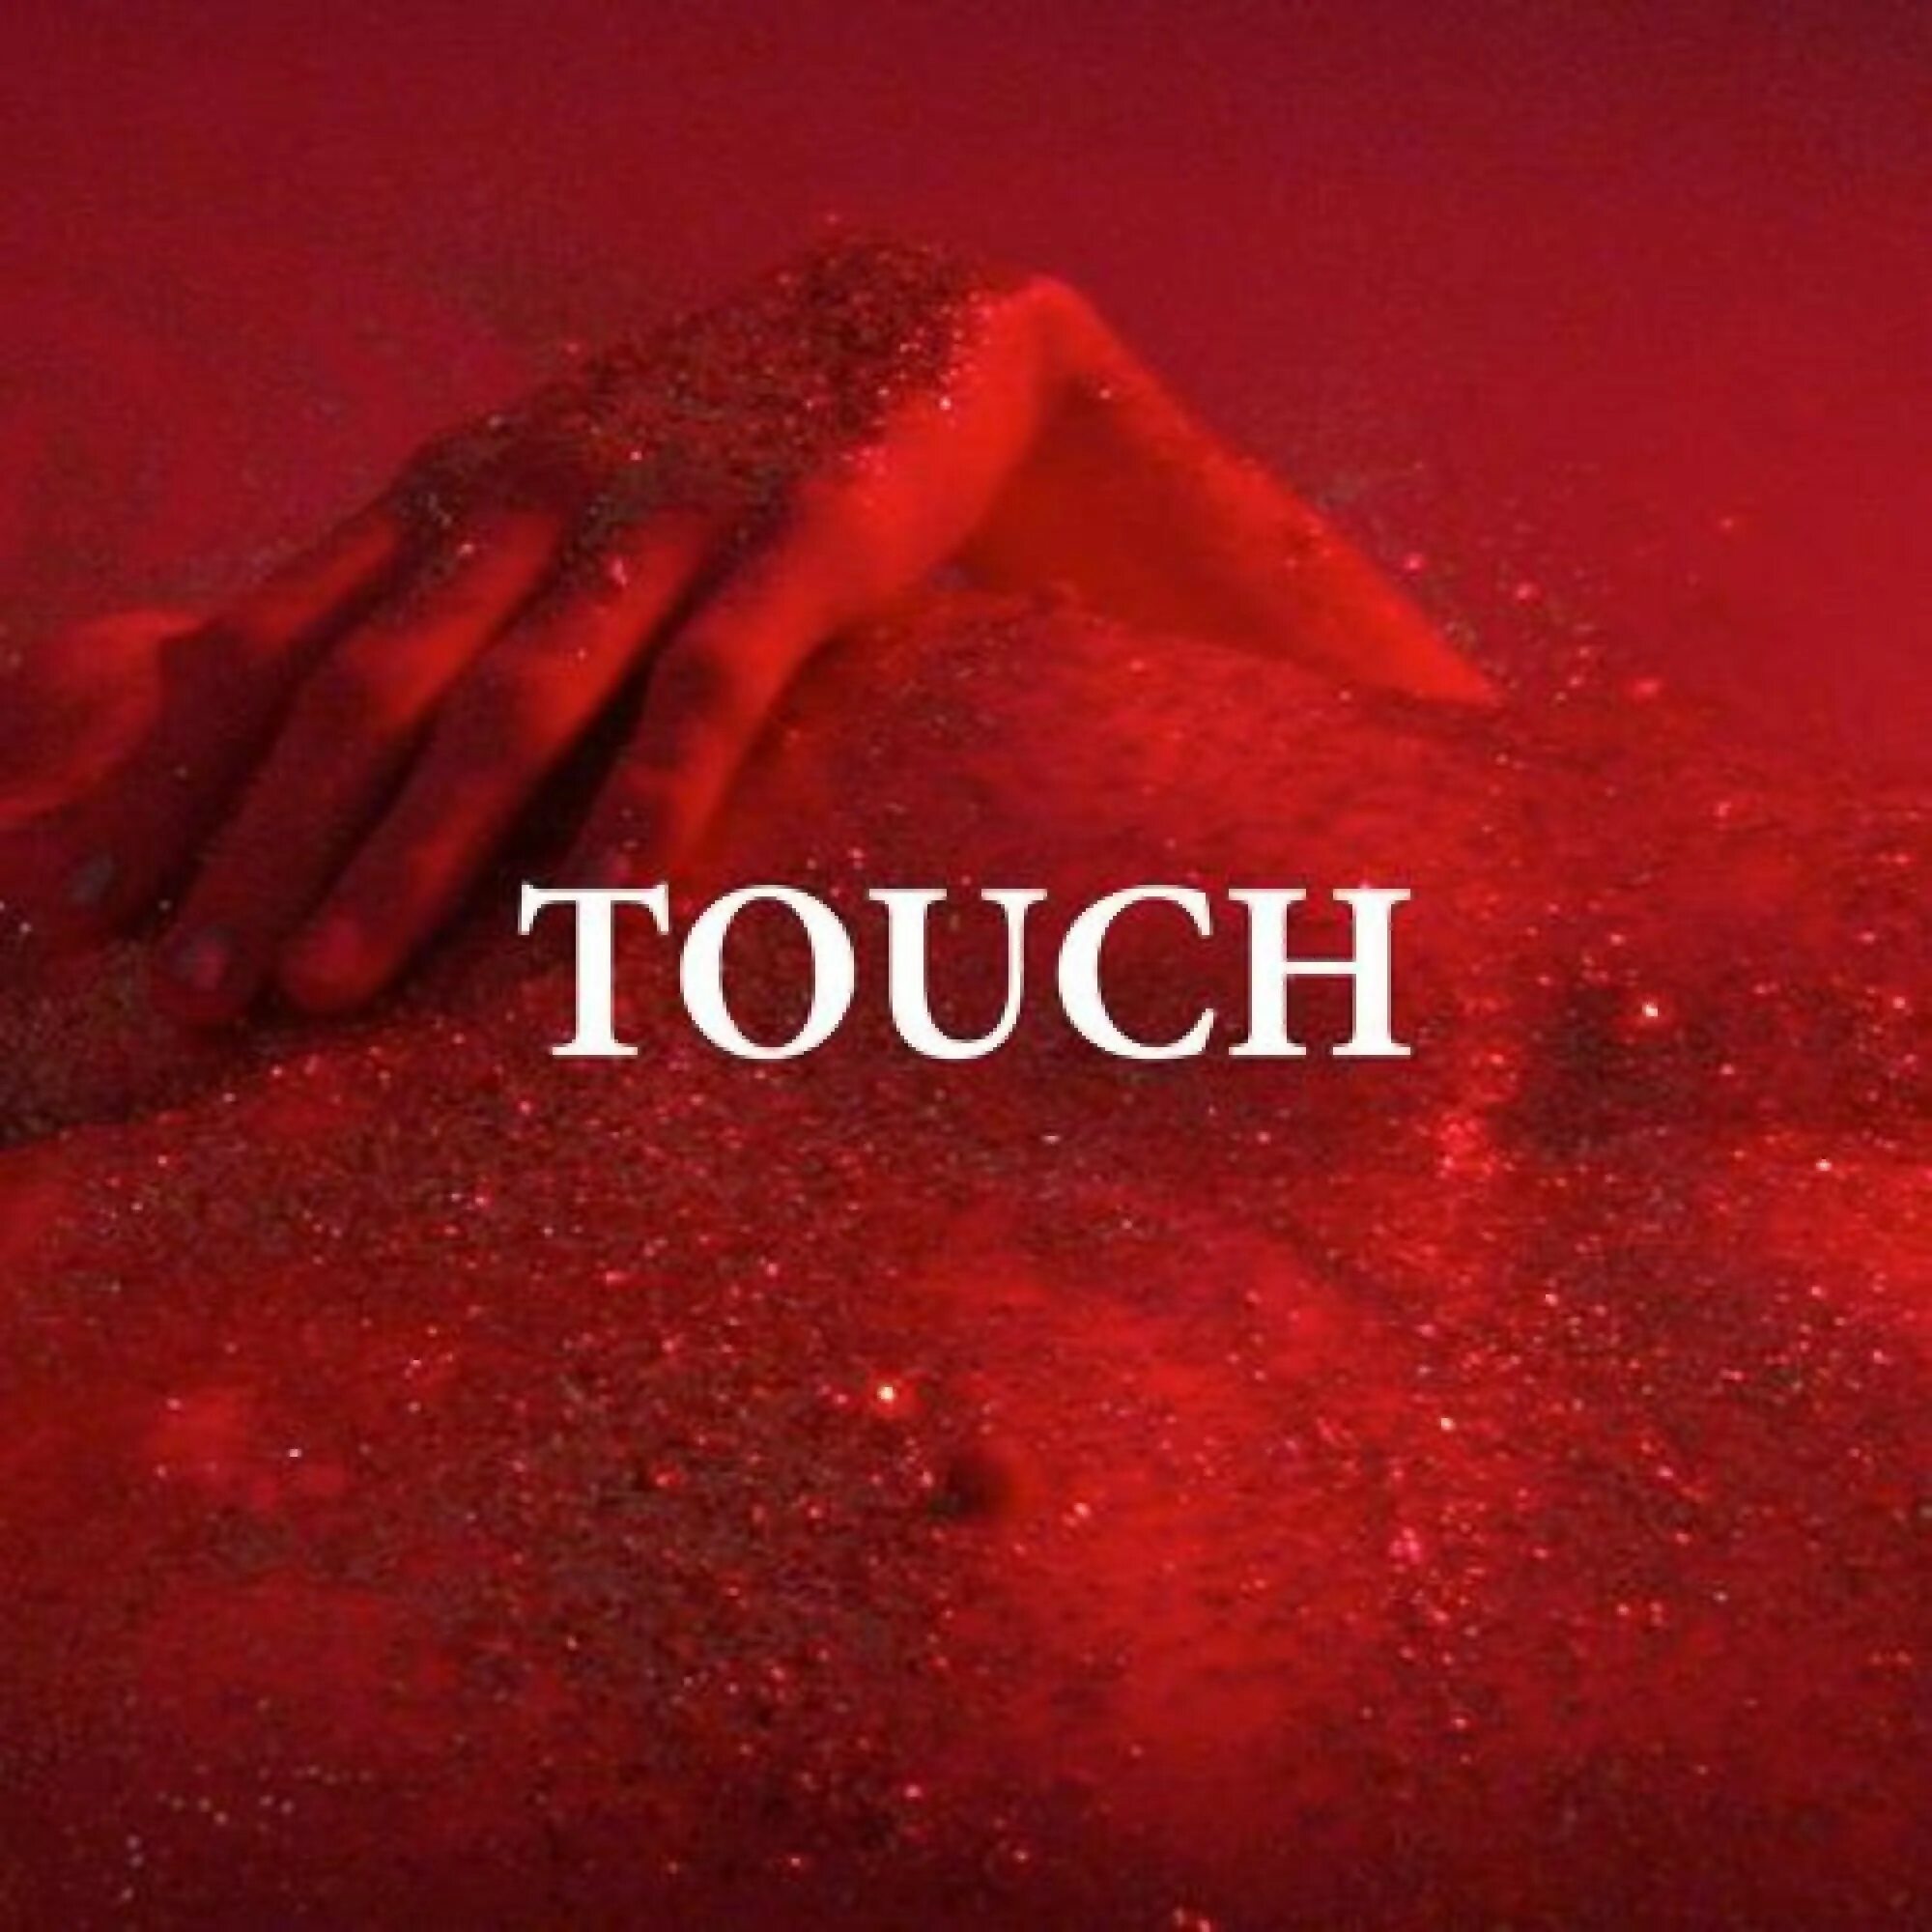 Touching song. I Touch. Touch песня. Бренд Touch me. Touch песня новая.